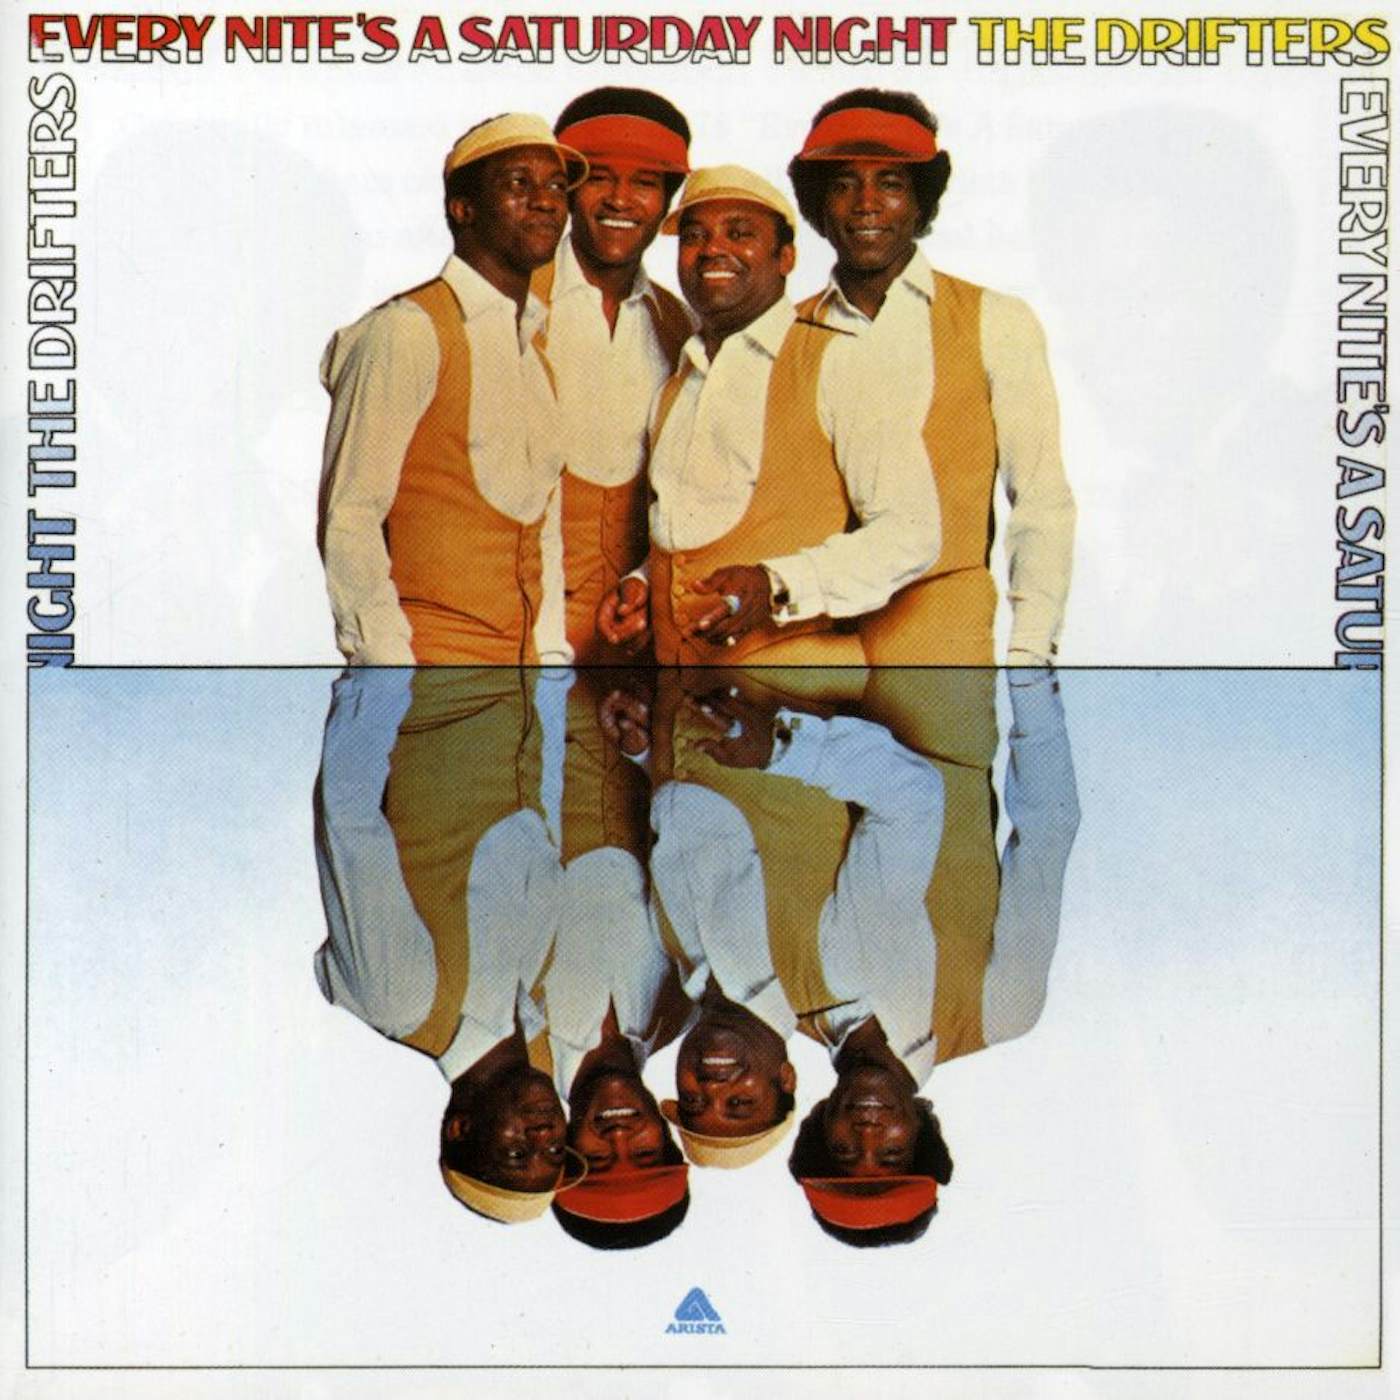 The Drifters EVERY NITE'S A SATURDAY NIGHT CD